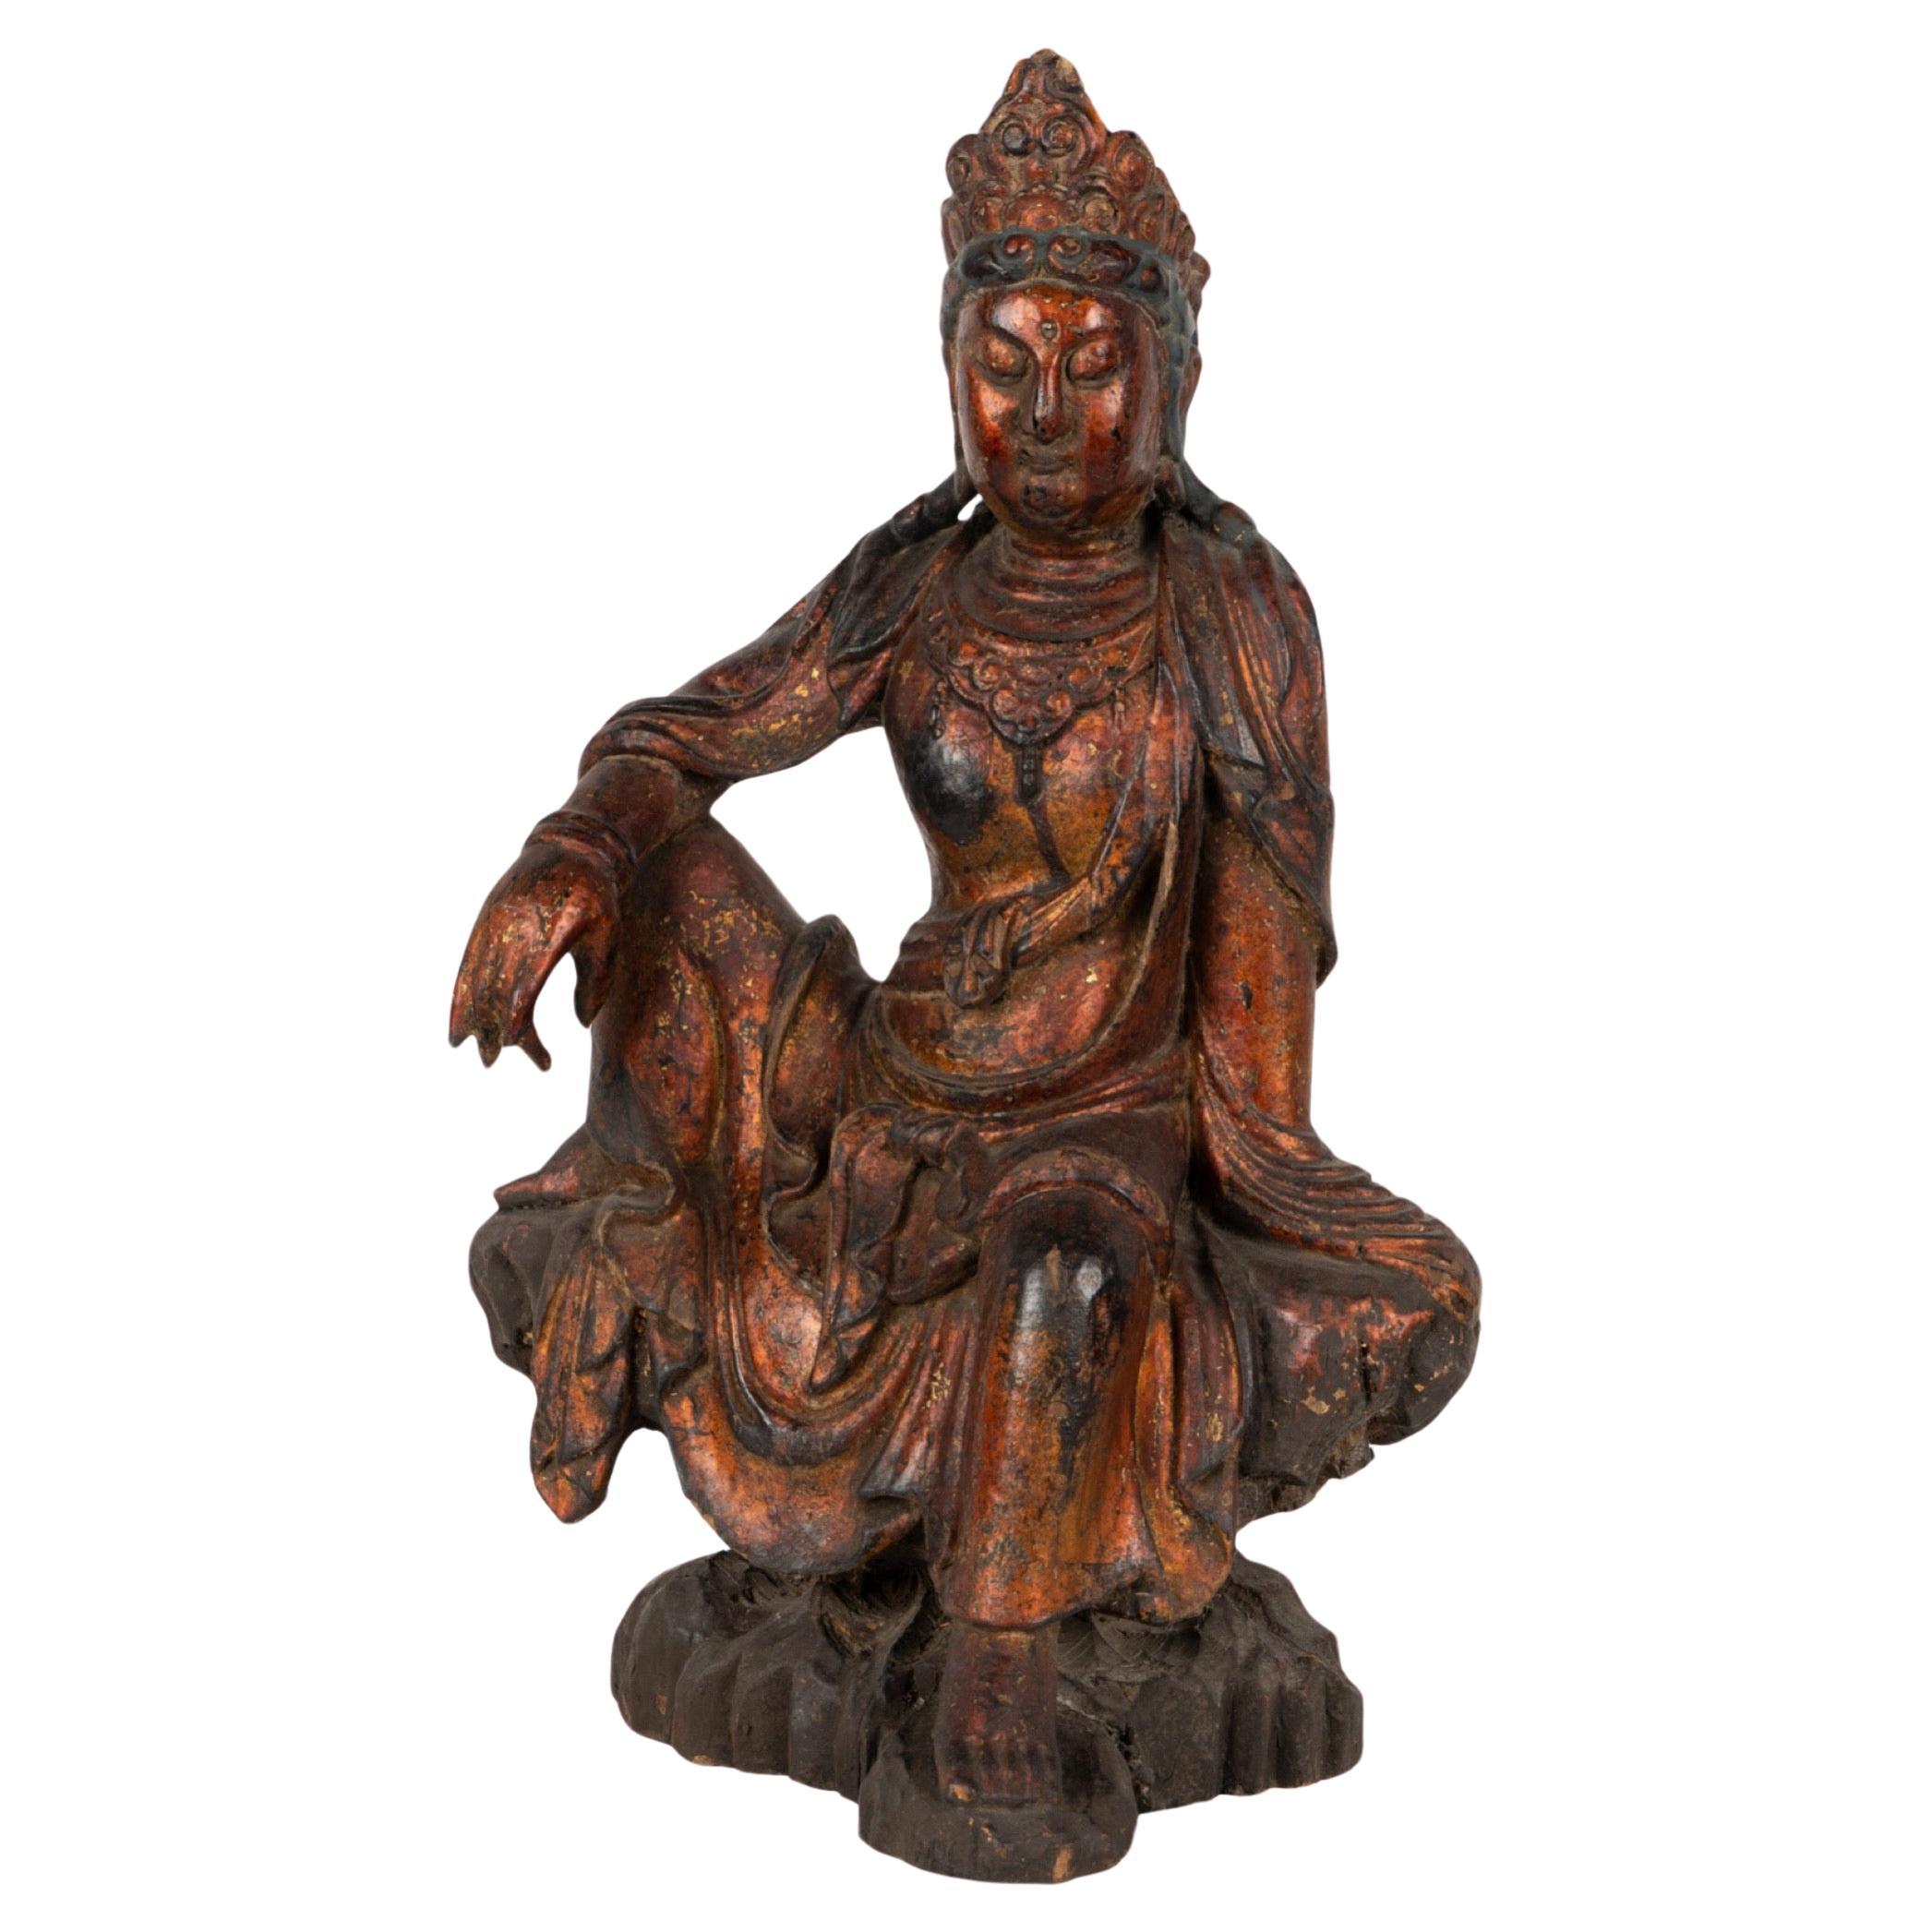 Gilt Lacquered Wood Figure of Guanyin, Ming Dynasty (1368-1644)